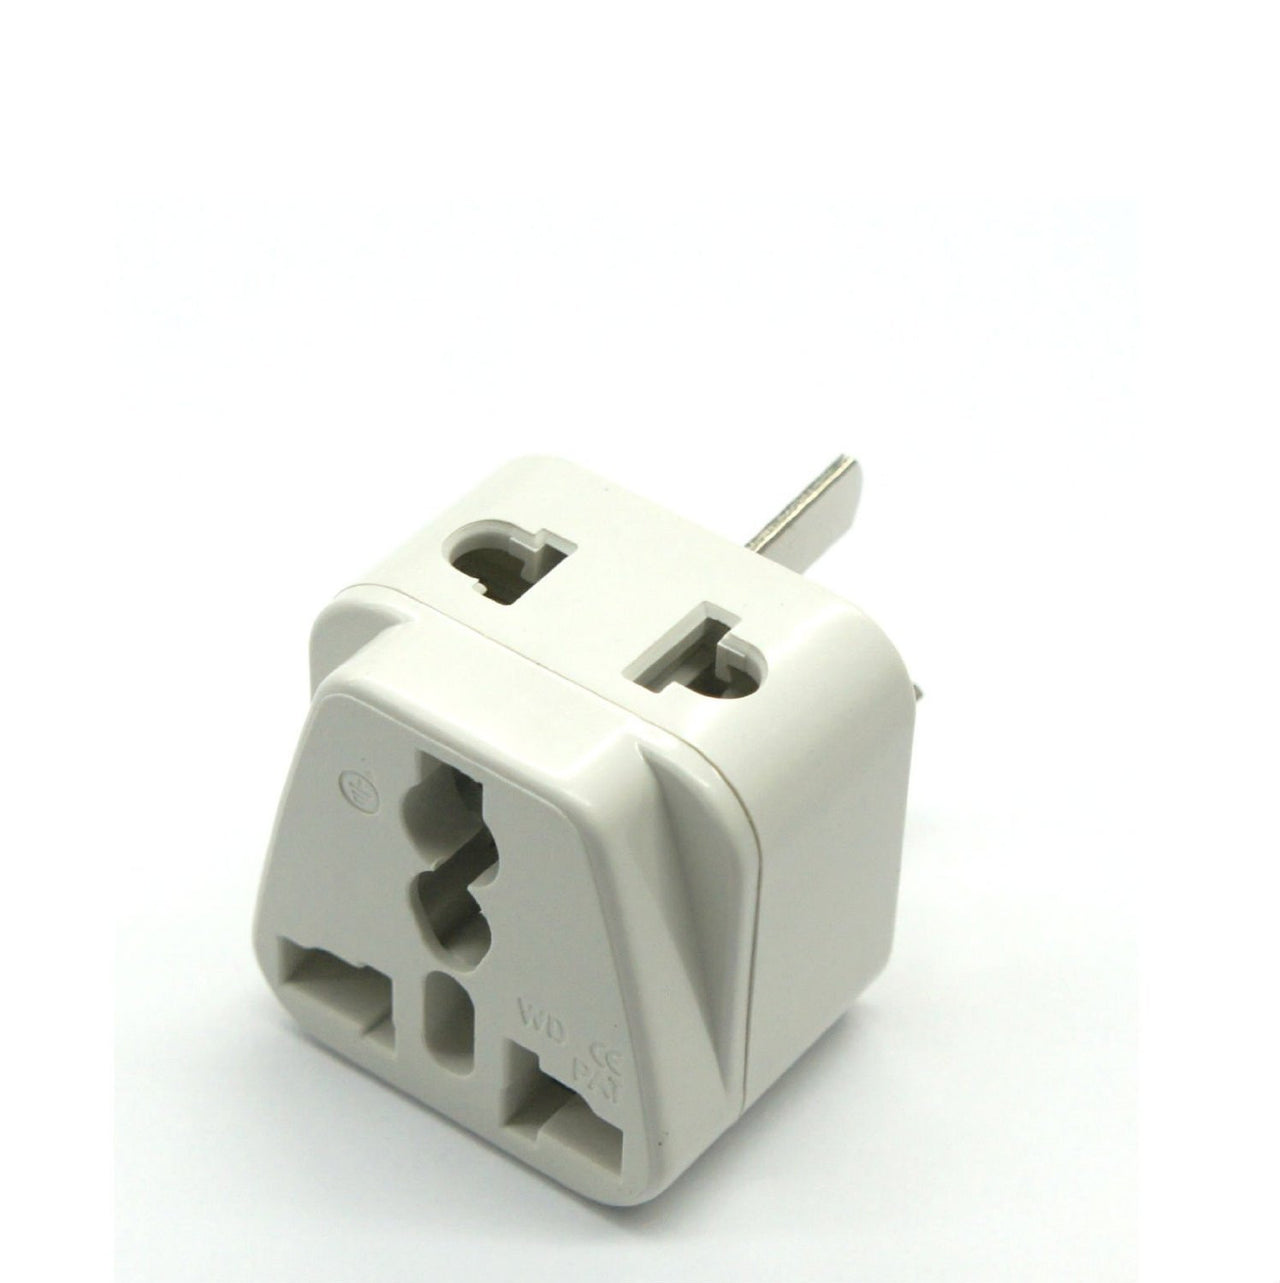 Germany, France, Europe, Russia - Type E/F (Schuko) 2 in 1 - Travel Plug Adapter - Popularelectronics.com